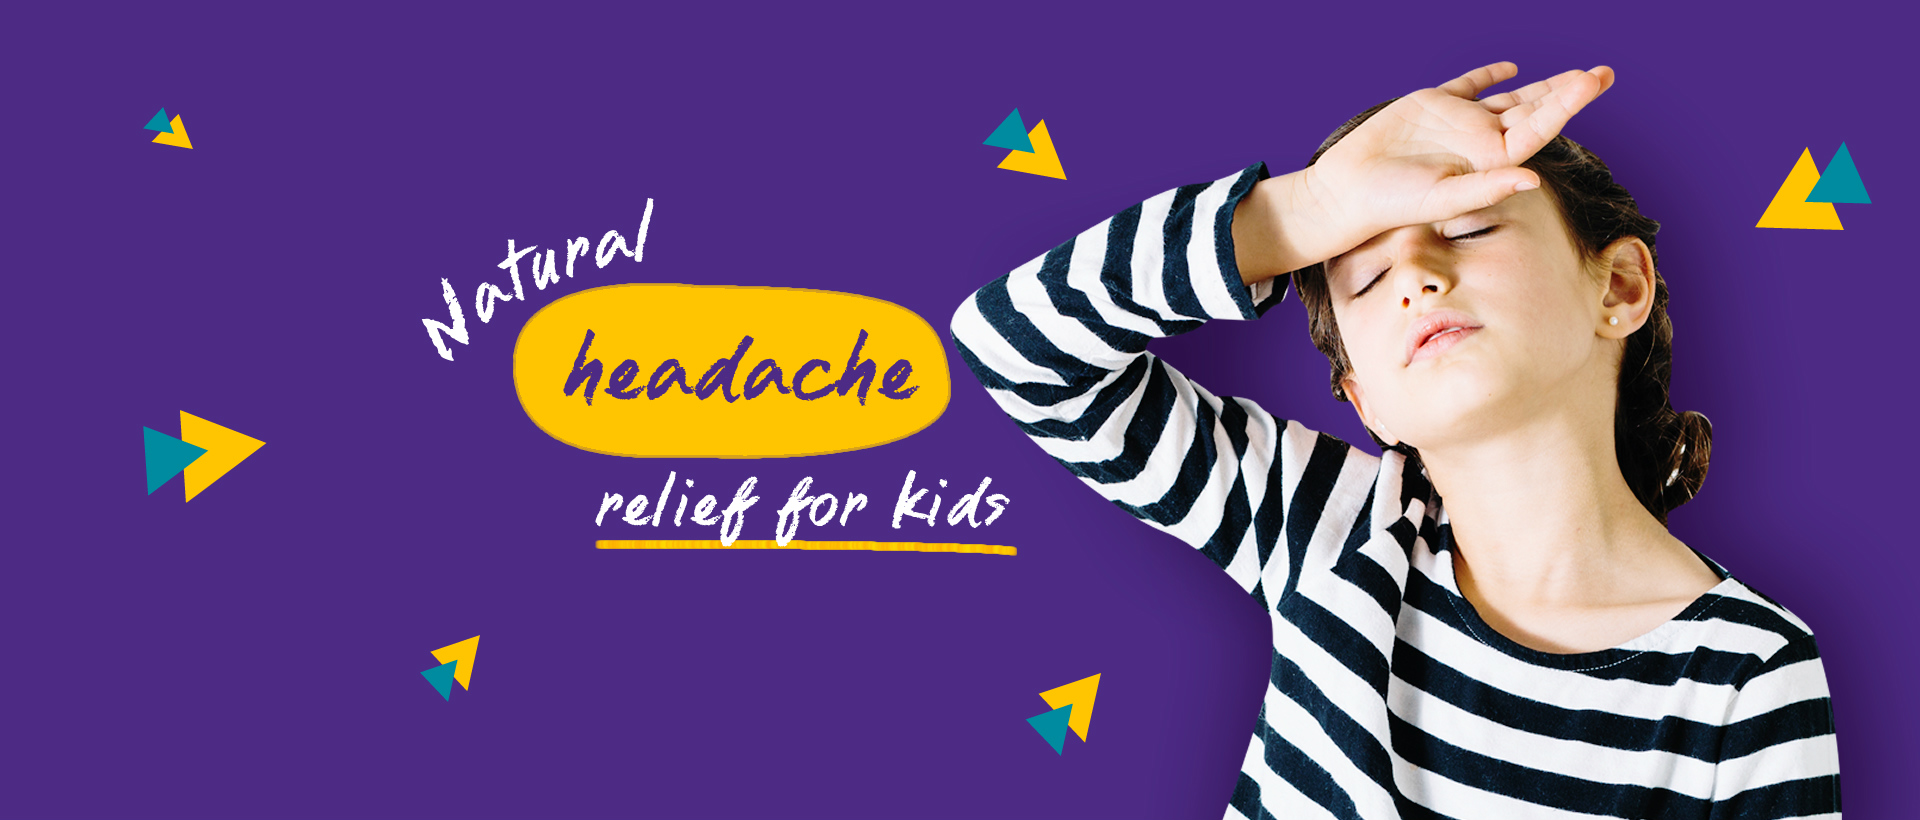 Natural headache relief for kids